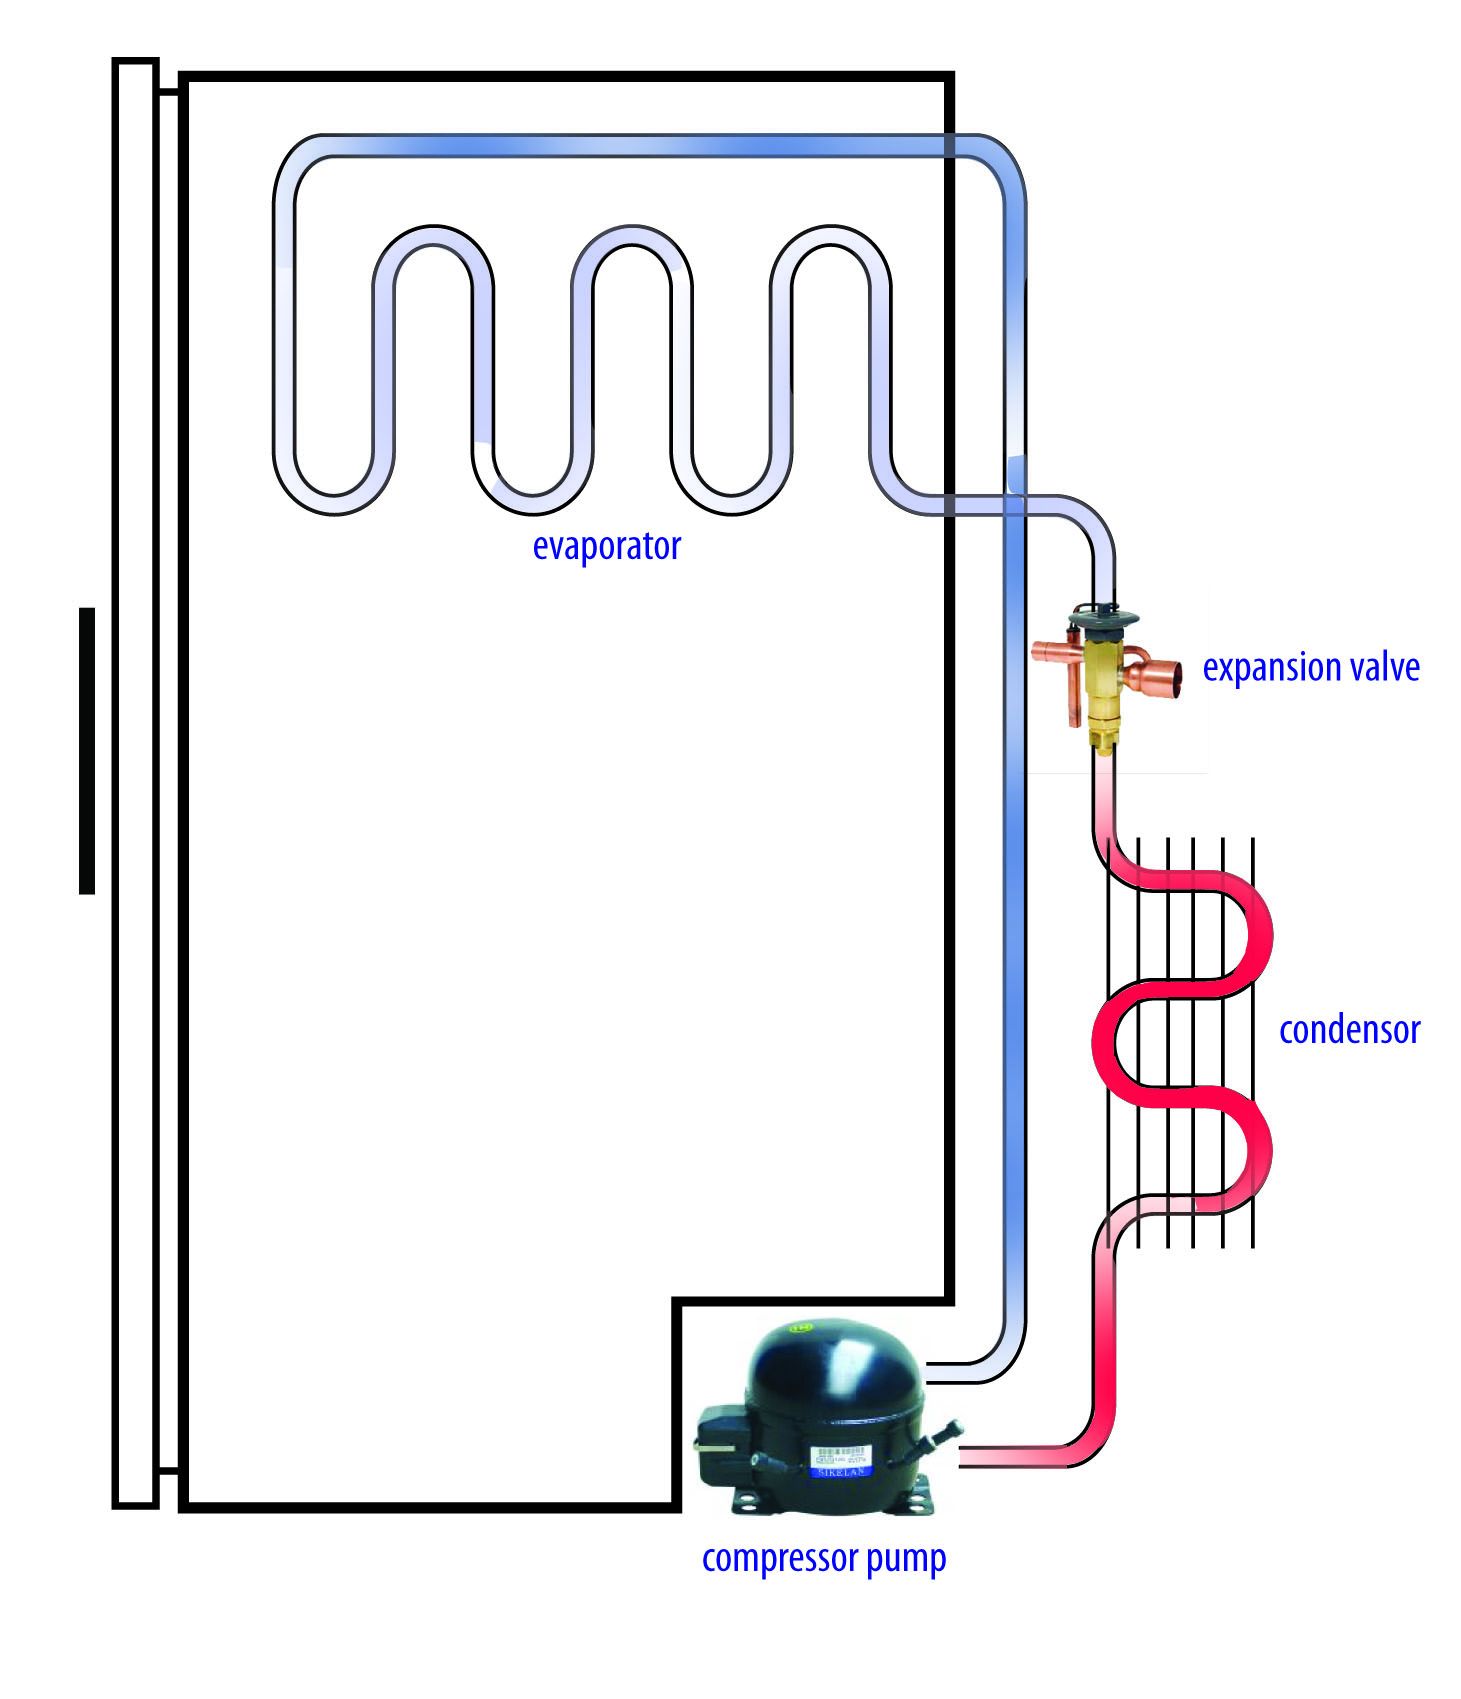 1115 Heat Pumps Cool Mobile Devices and Distribute Heat within Spacecraft In Article 1